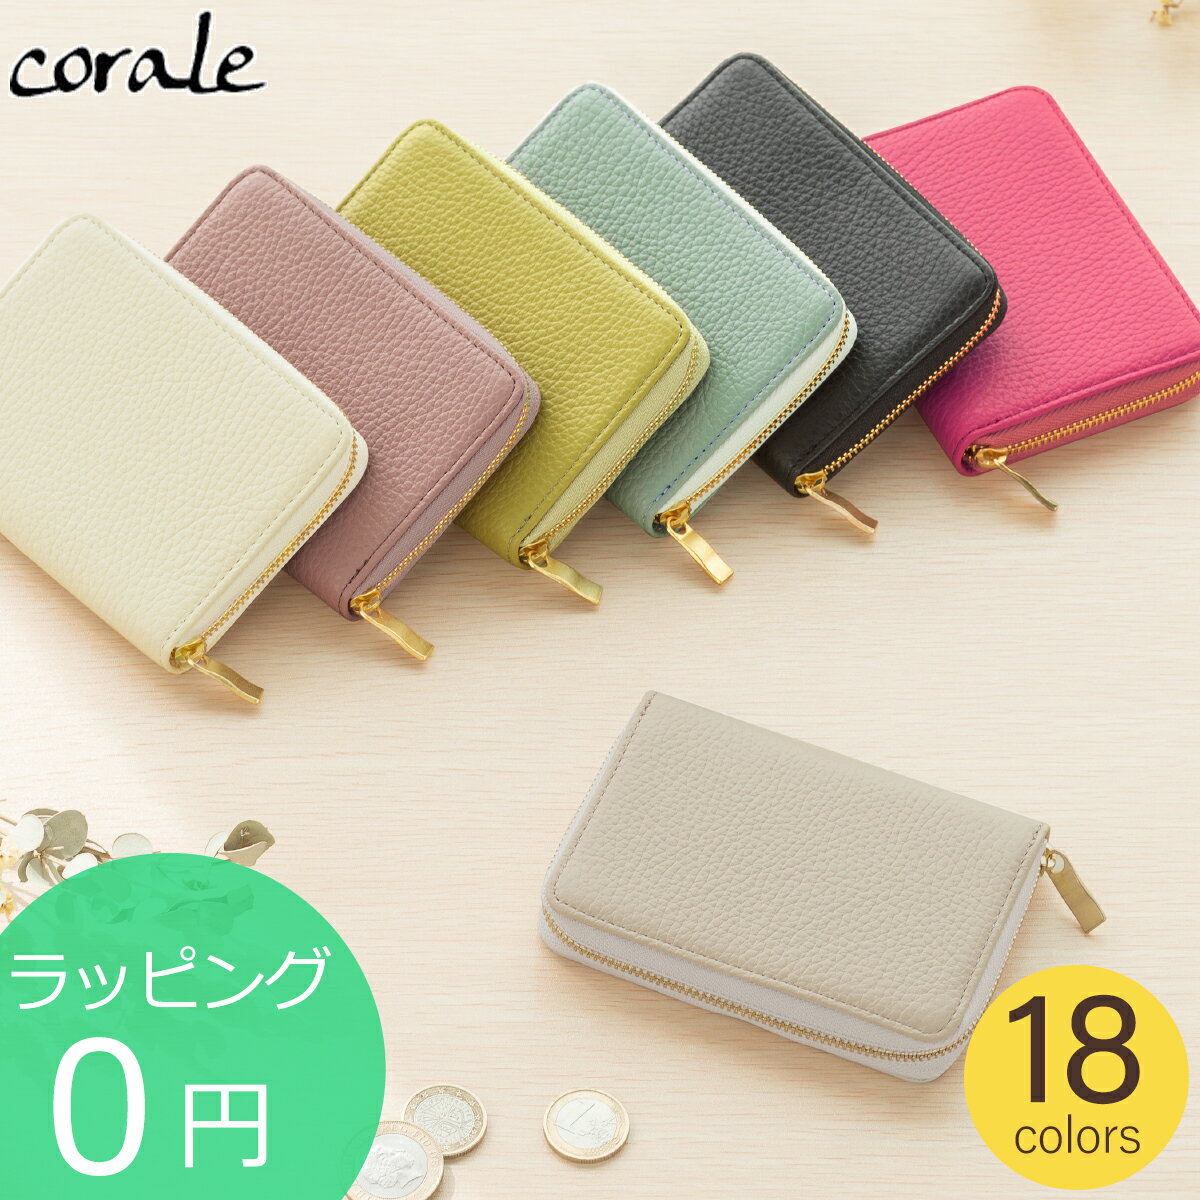   SALE  corale RCP[X fB[X RpNg z J[hP[X K z {v C^AU[ 18colors R[ 204  bsO 